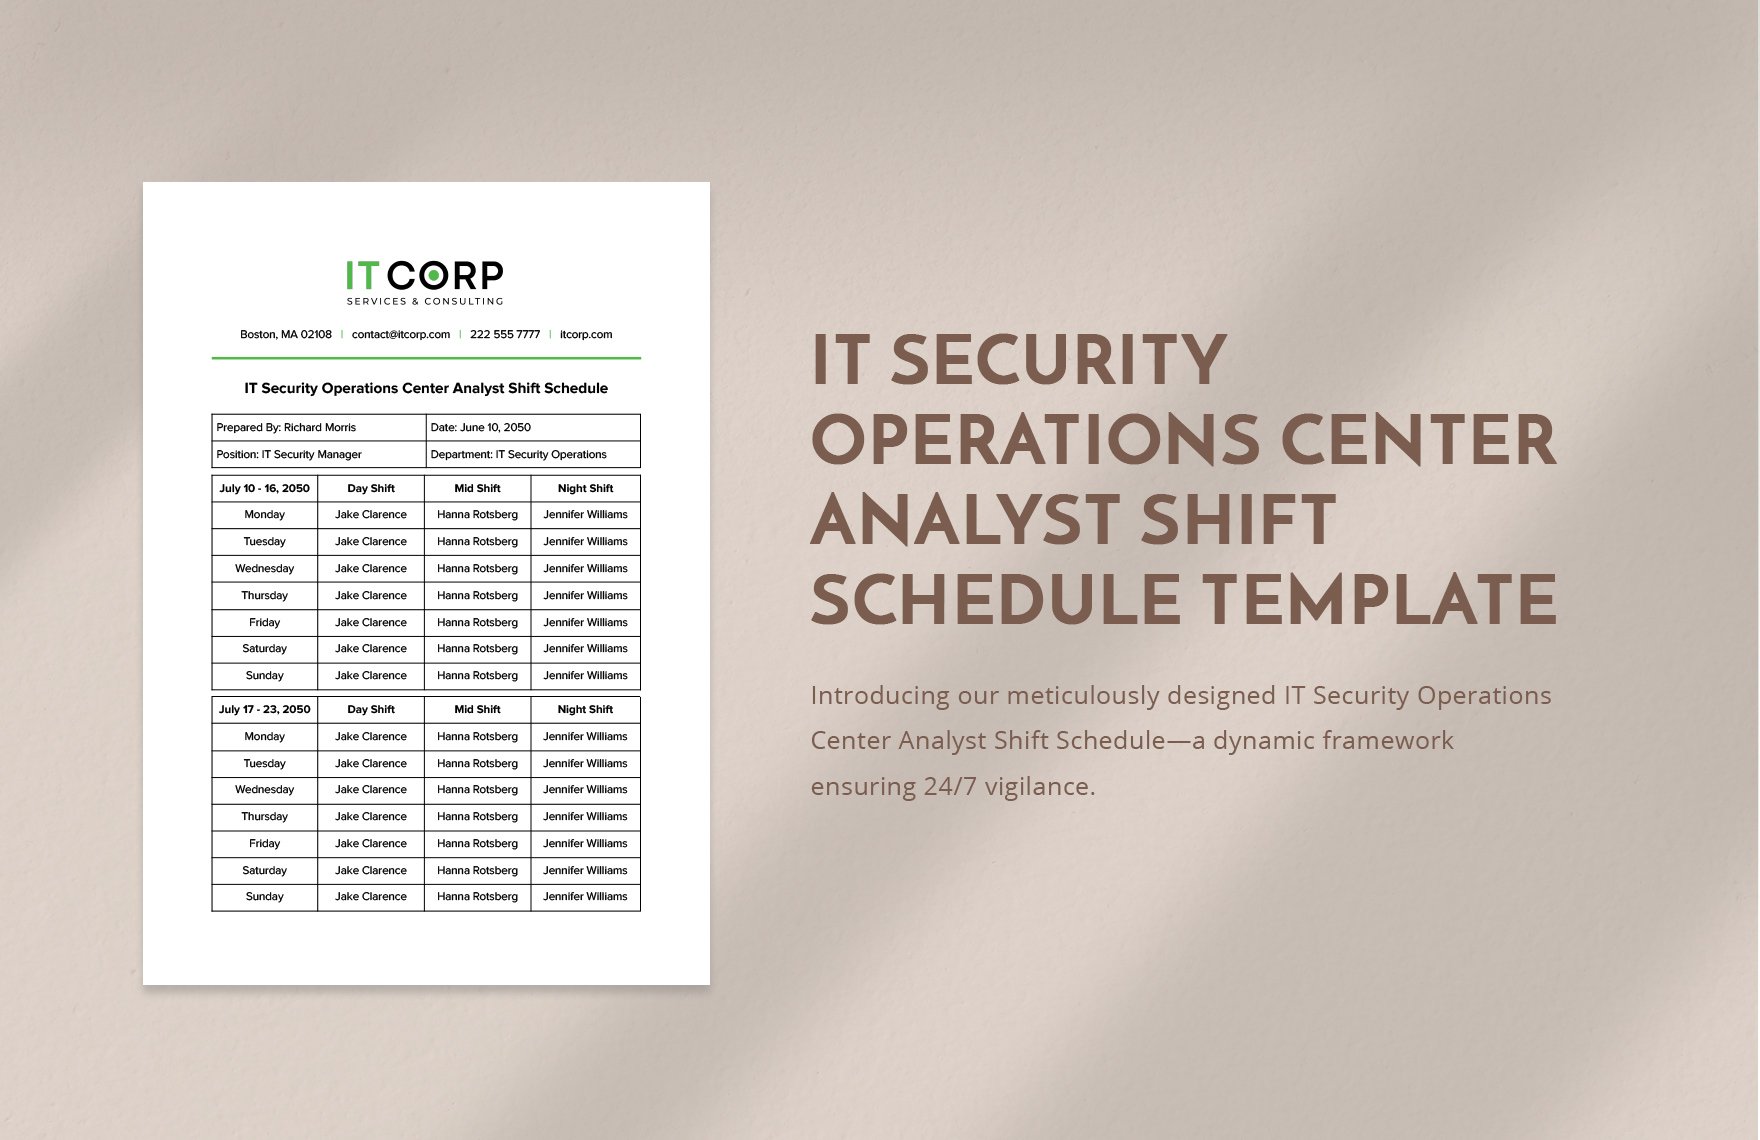 IT Security Operations Center Analyst Shift Schedule Template